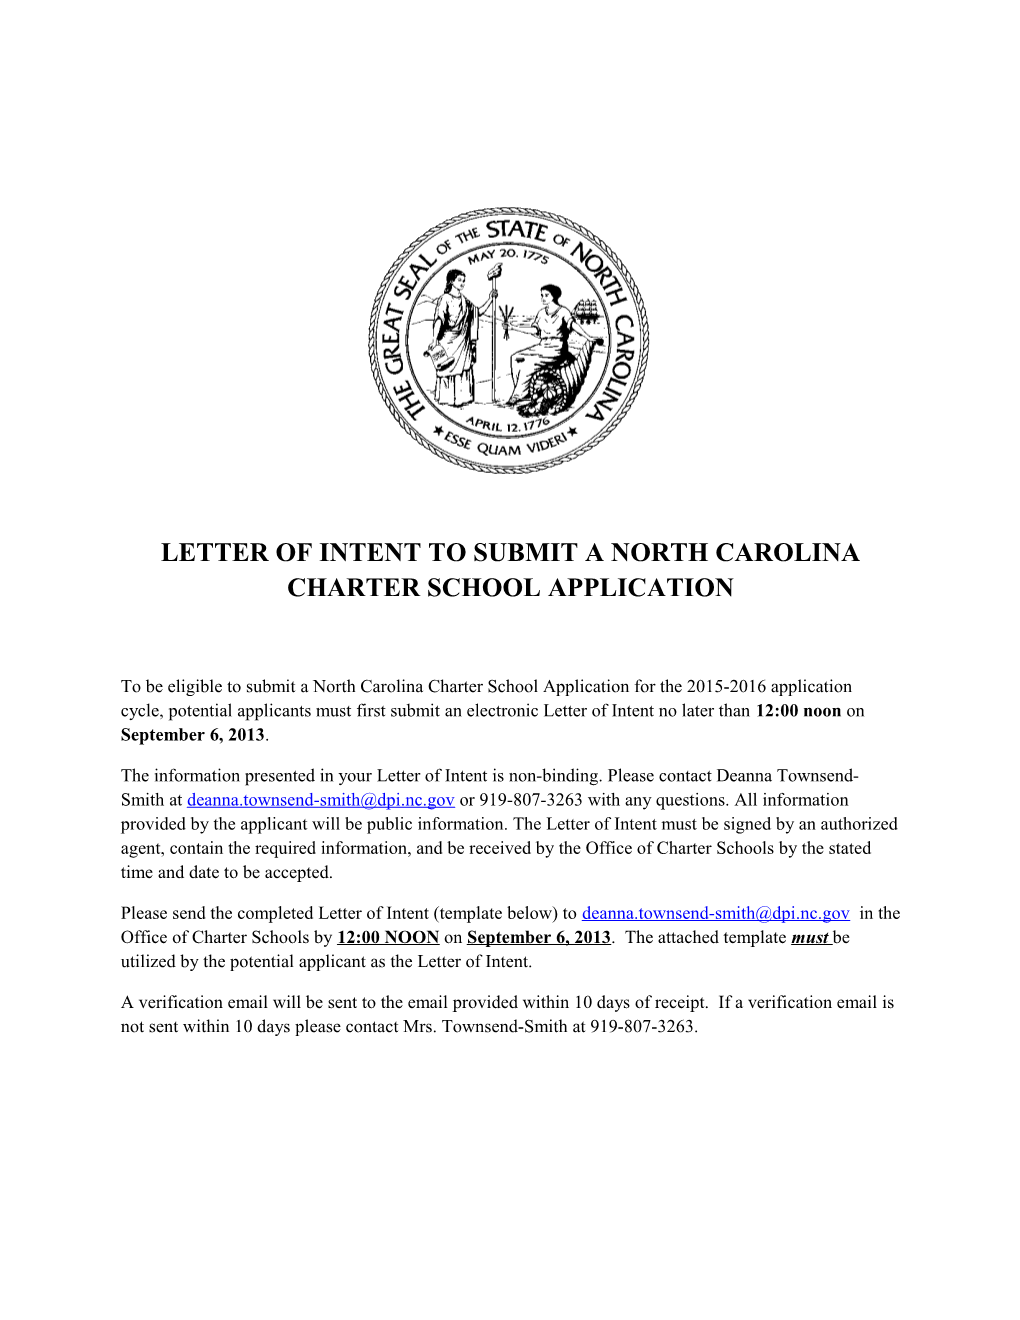 Letter of Intent to Submit a North Carolina Charter School Application